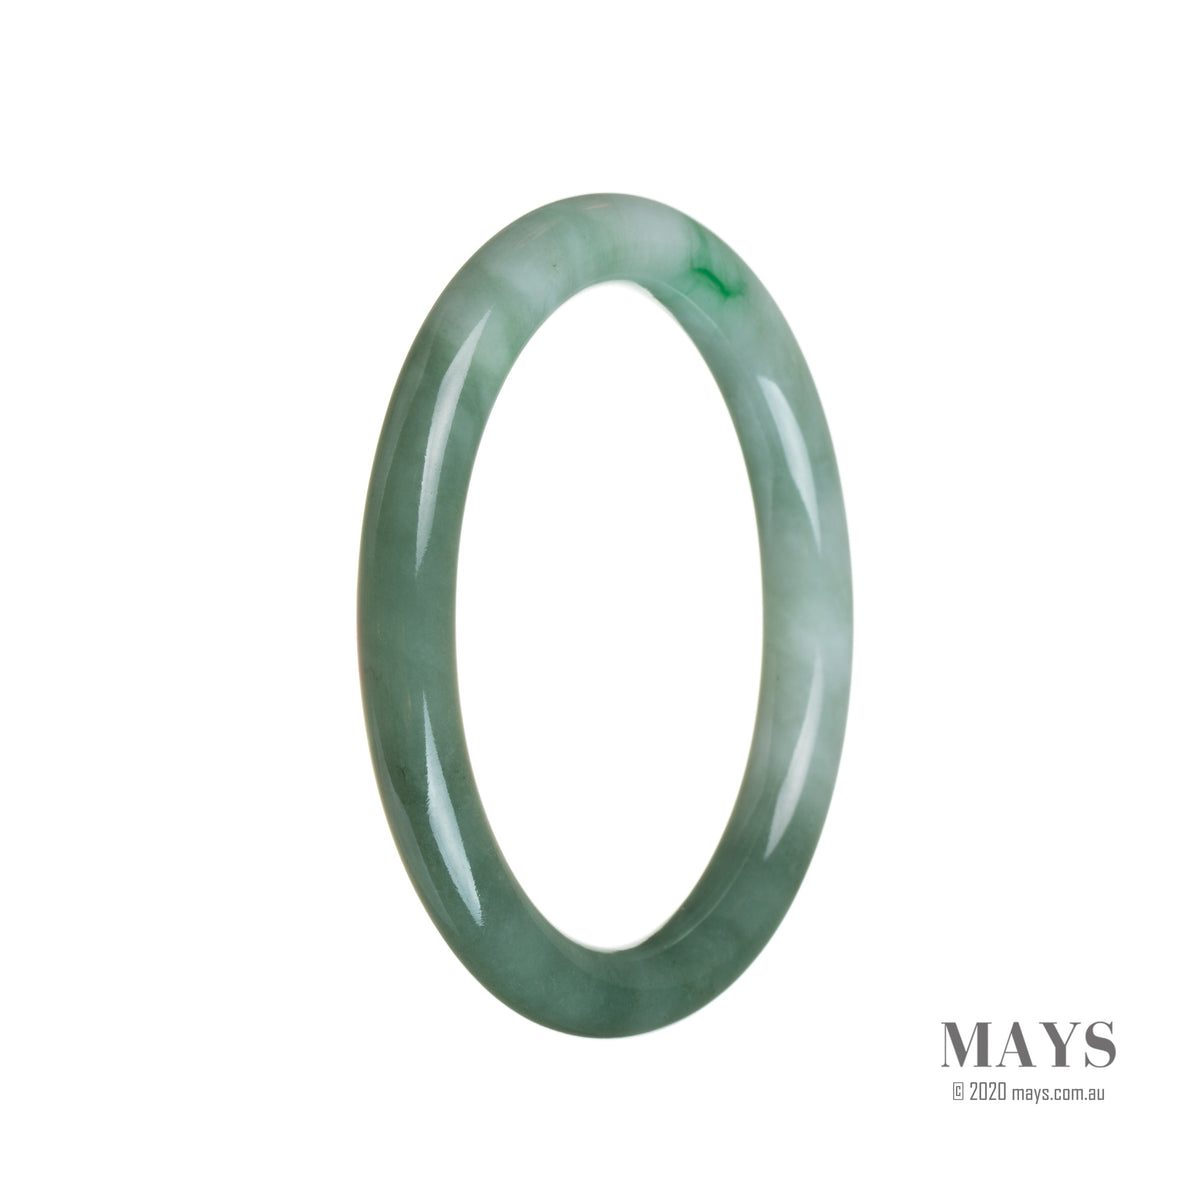 A small, round traditional jade bangle with a beautiful green pattern.